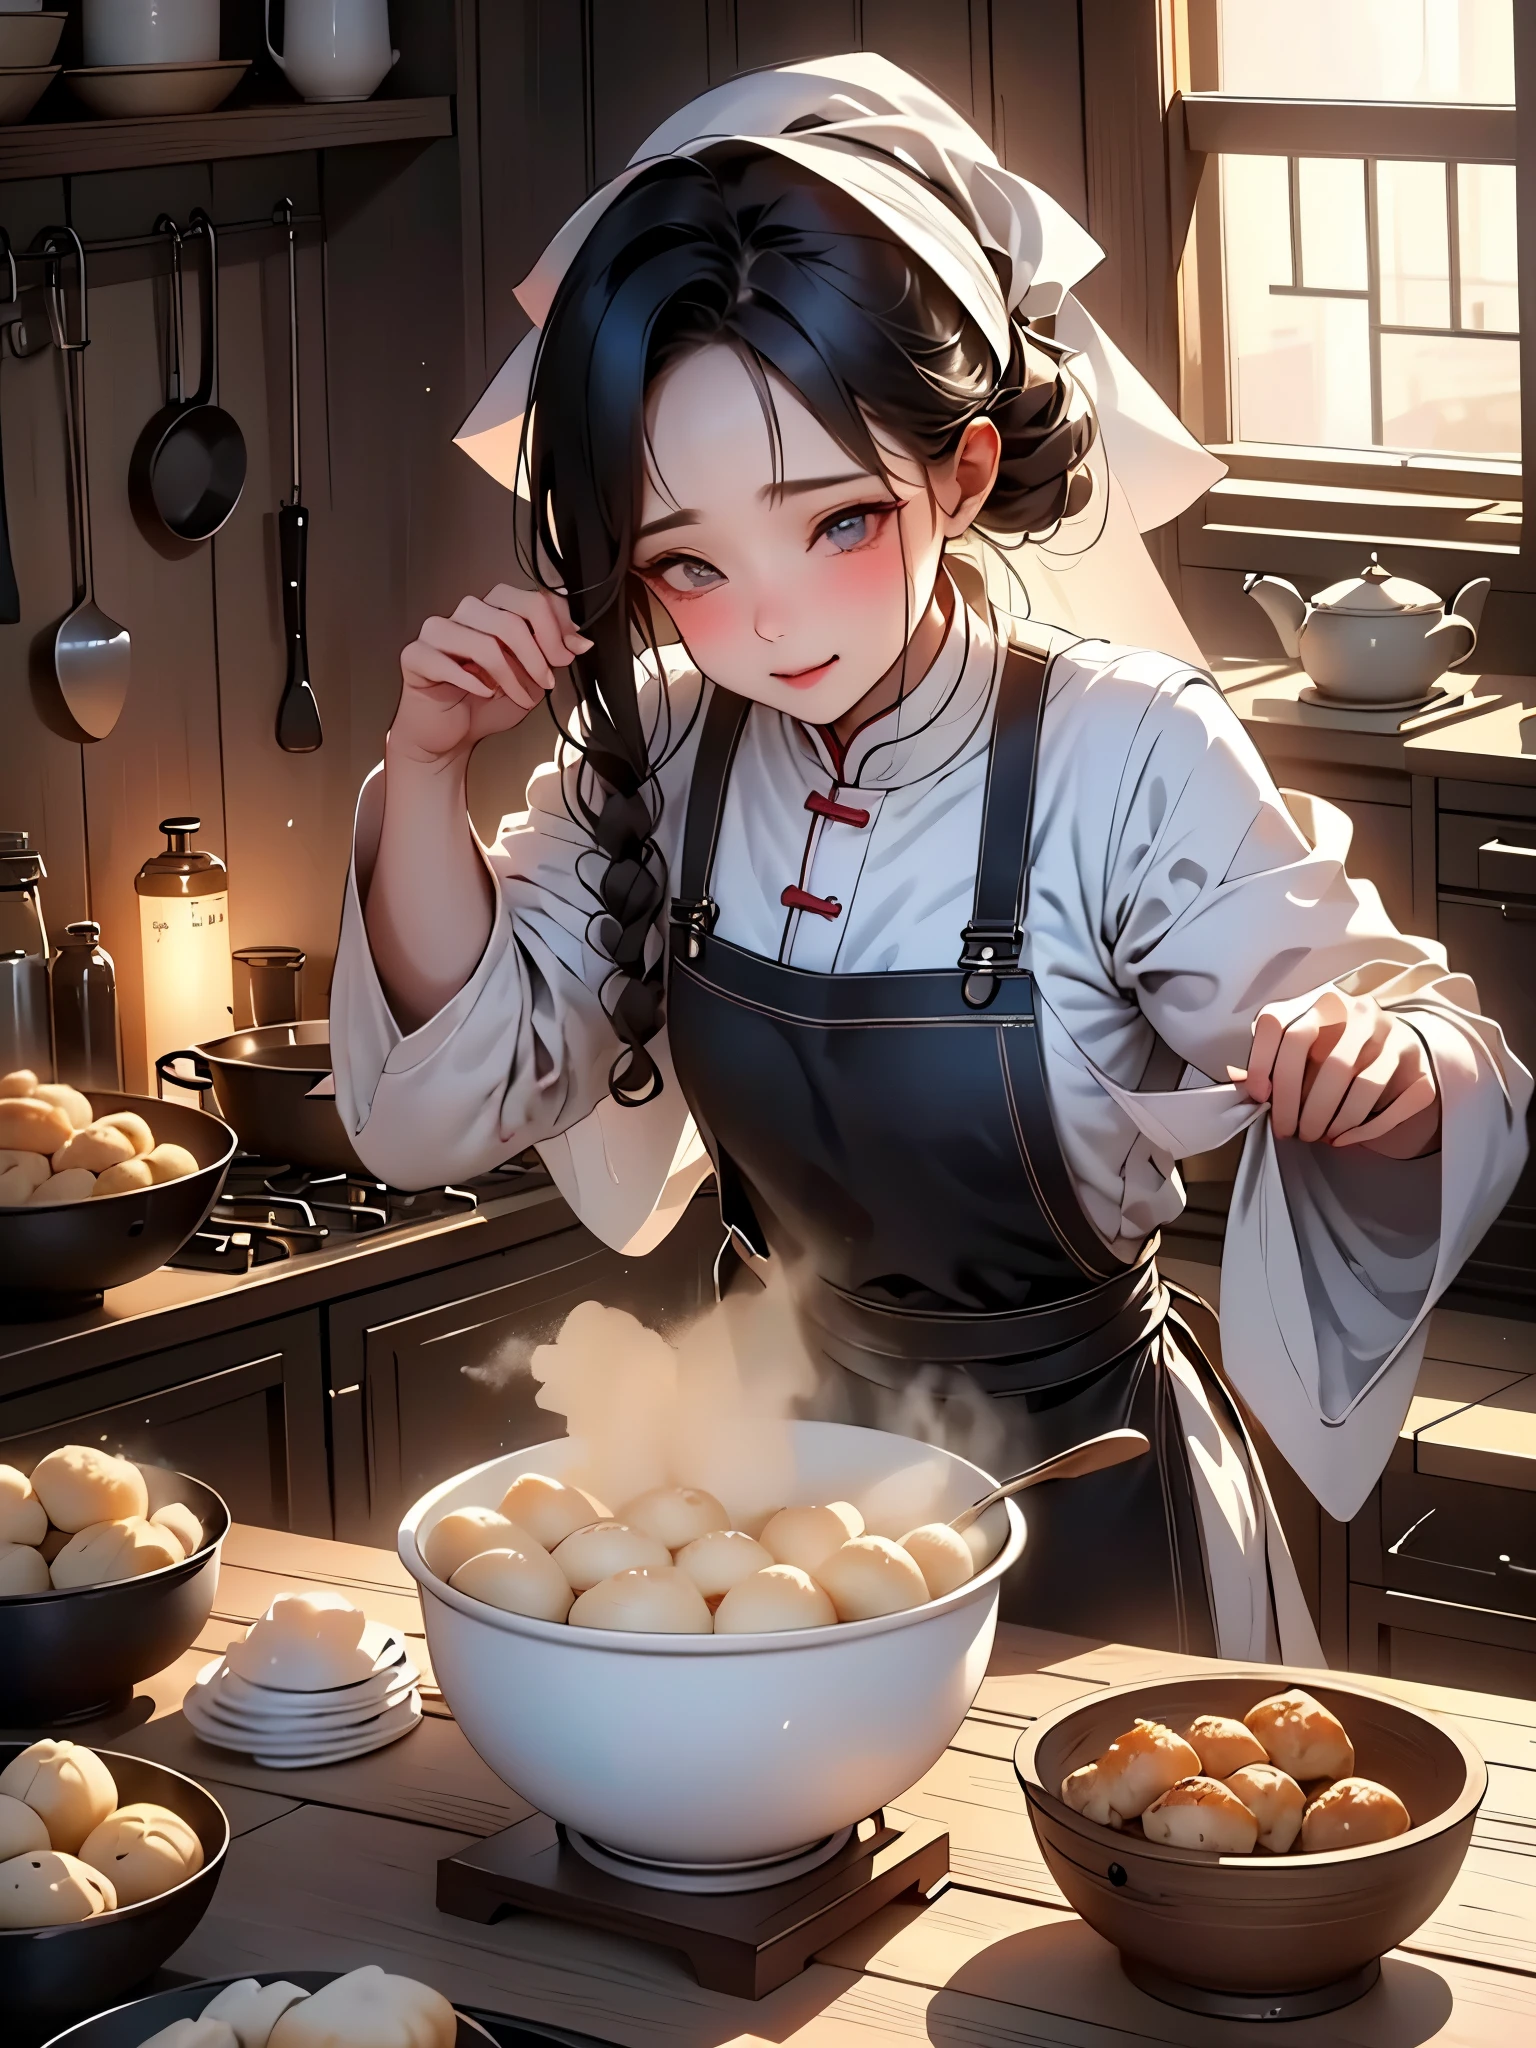 (top-quality、hight resolution:1.2) 、(reallistic、フォトreallistic:1.37) 、HDR、Studio Lighting、ultra-detailliert、 Girl in the kitchen、Girl in an apron、beatiful detailed eyes、Beautiful detailed lips、 cooking scene、Delicious aroma、flour on countertop、kitchenware、 gyoza dough、rolling pin、gyoza wrapper、Baked dumplings、steam、 Fresh ingredientinced pork、mushroom、col、green onion、 traditional chinese dumplings、Chinese food、Authentic taste、 vivd colour、Warm tones、Soft lighting、 happy atmosphere、fun look、 whets the appetite、crispy gyoza skin。